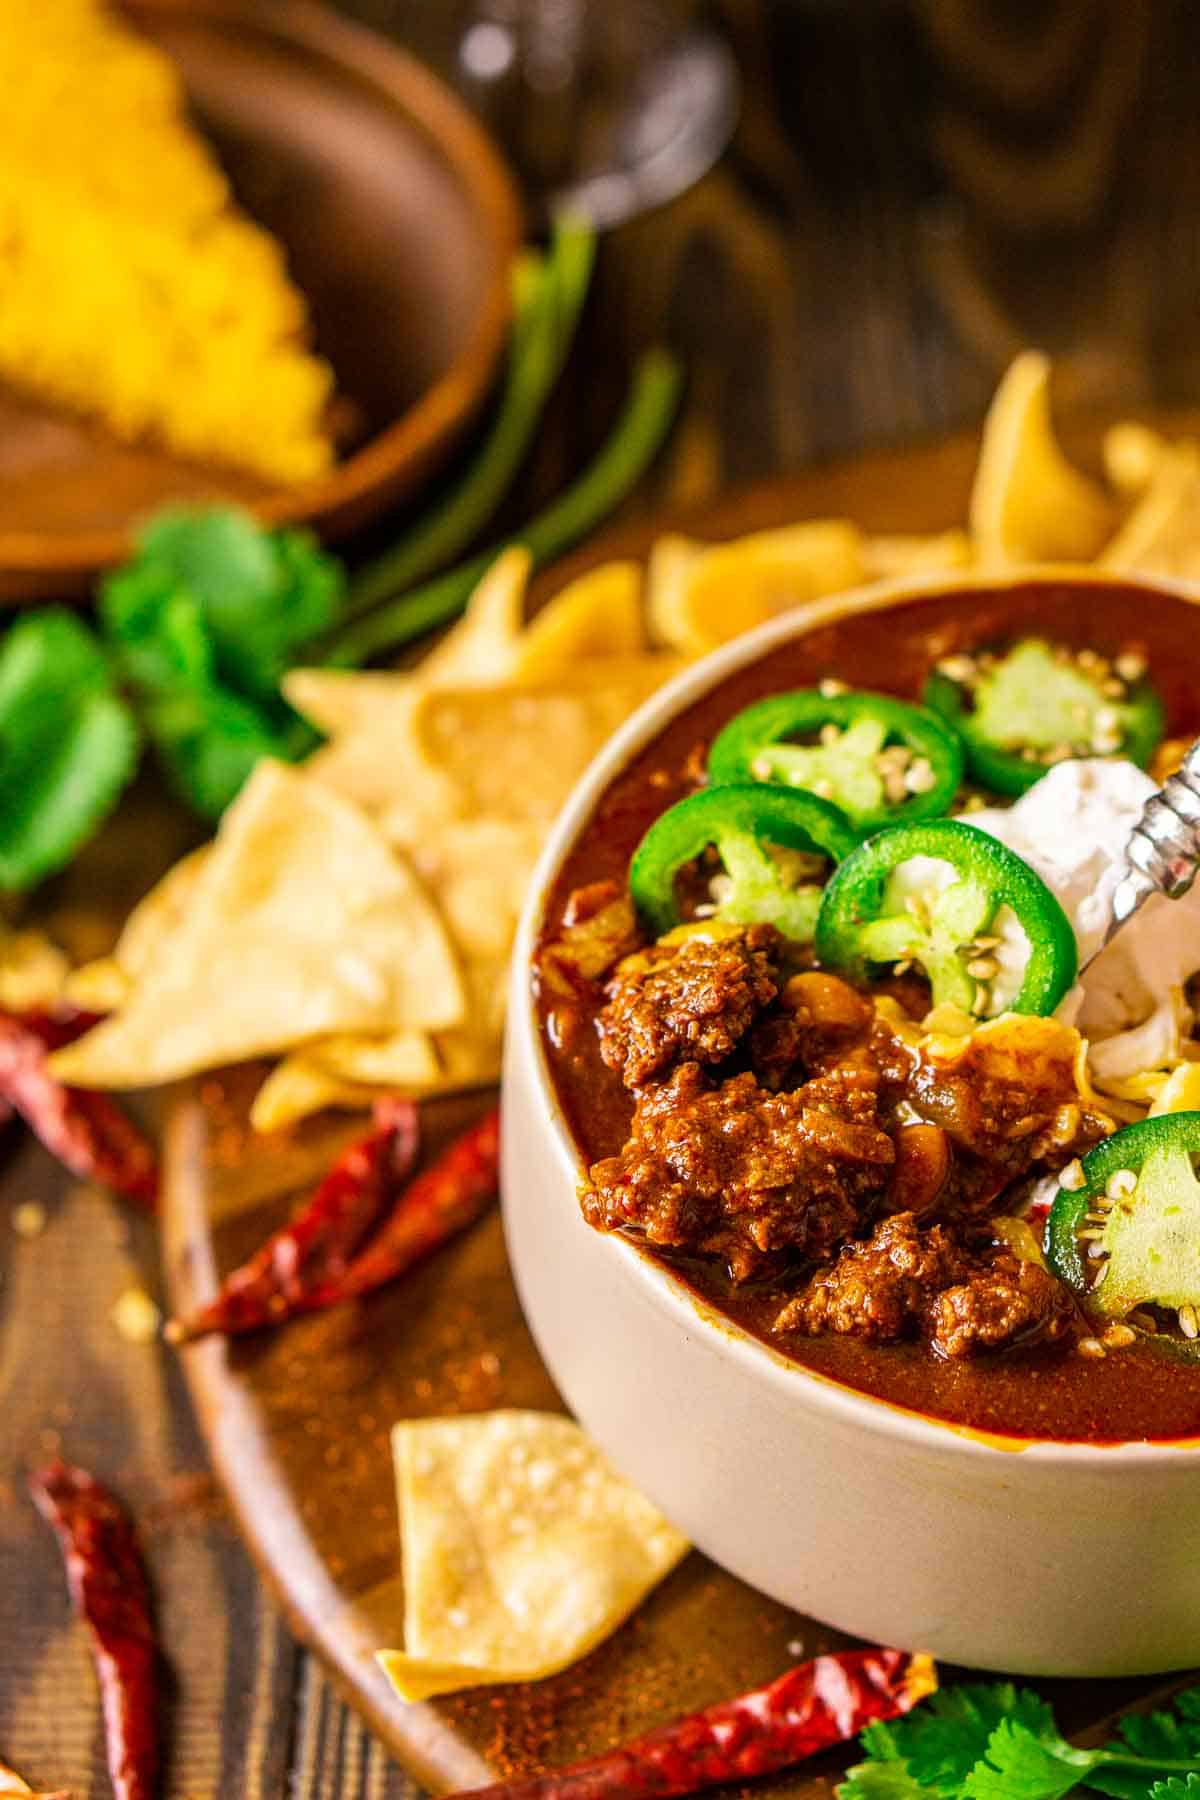 A spoon in the bowl of venison chili bringing the meat up with cilantro, chips and dried chiles scattered to the left.